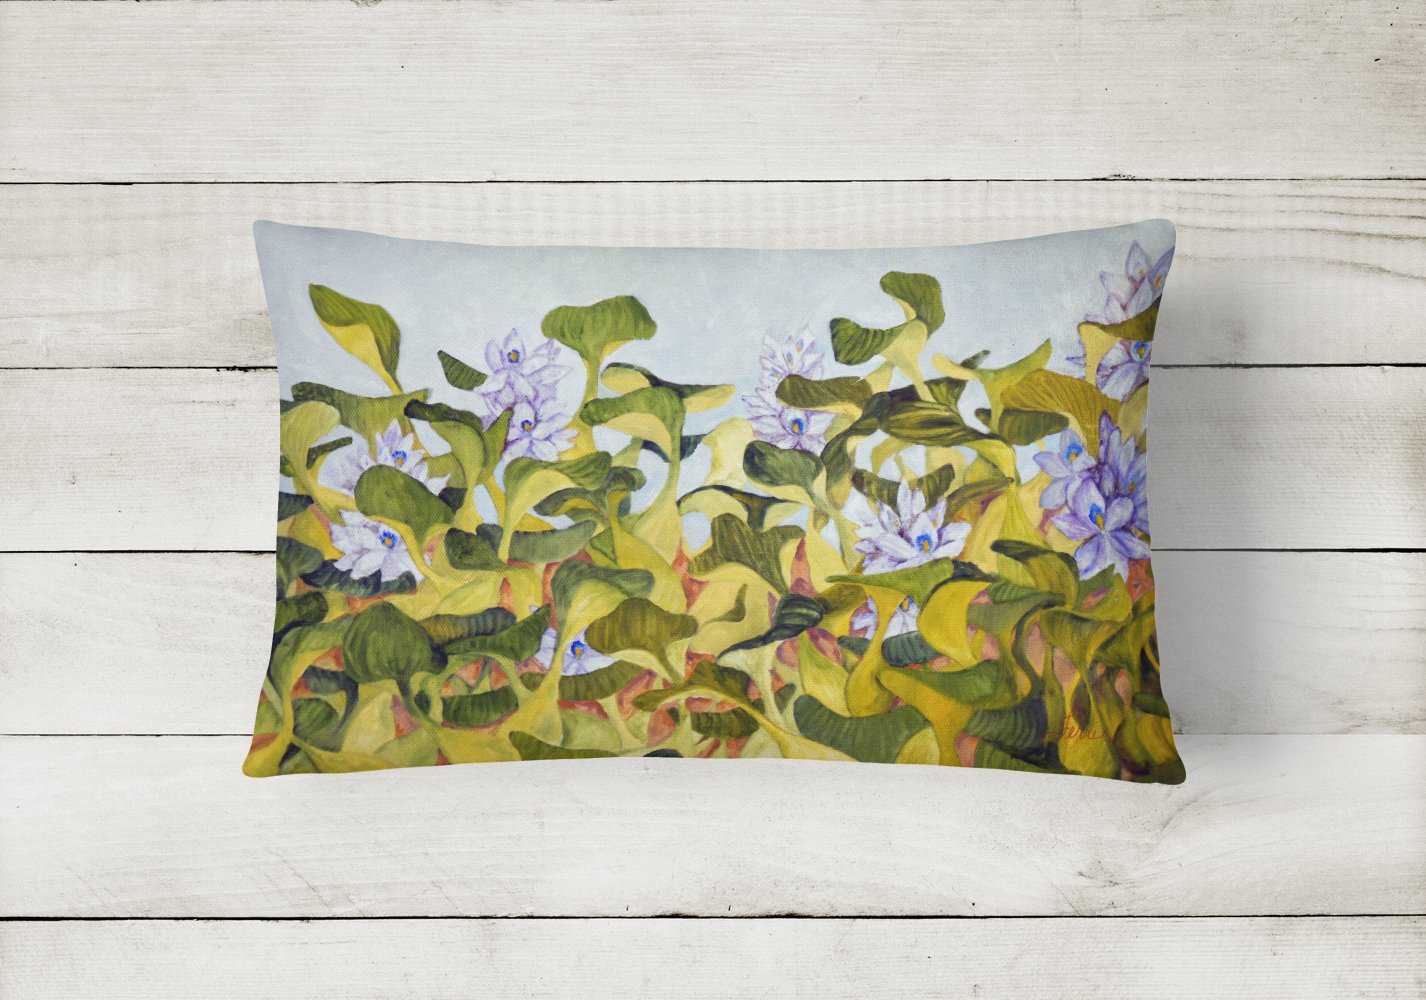 Buy this Water Hyacinth by Ferris Hotard Canvas Fabric Decorative Pillow